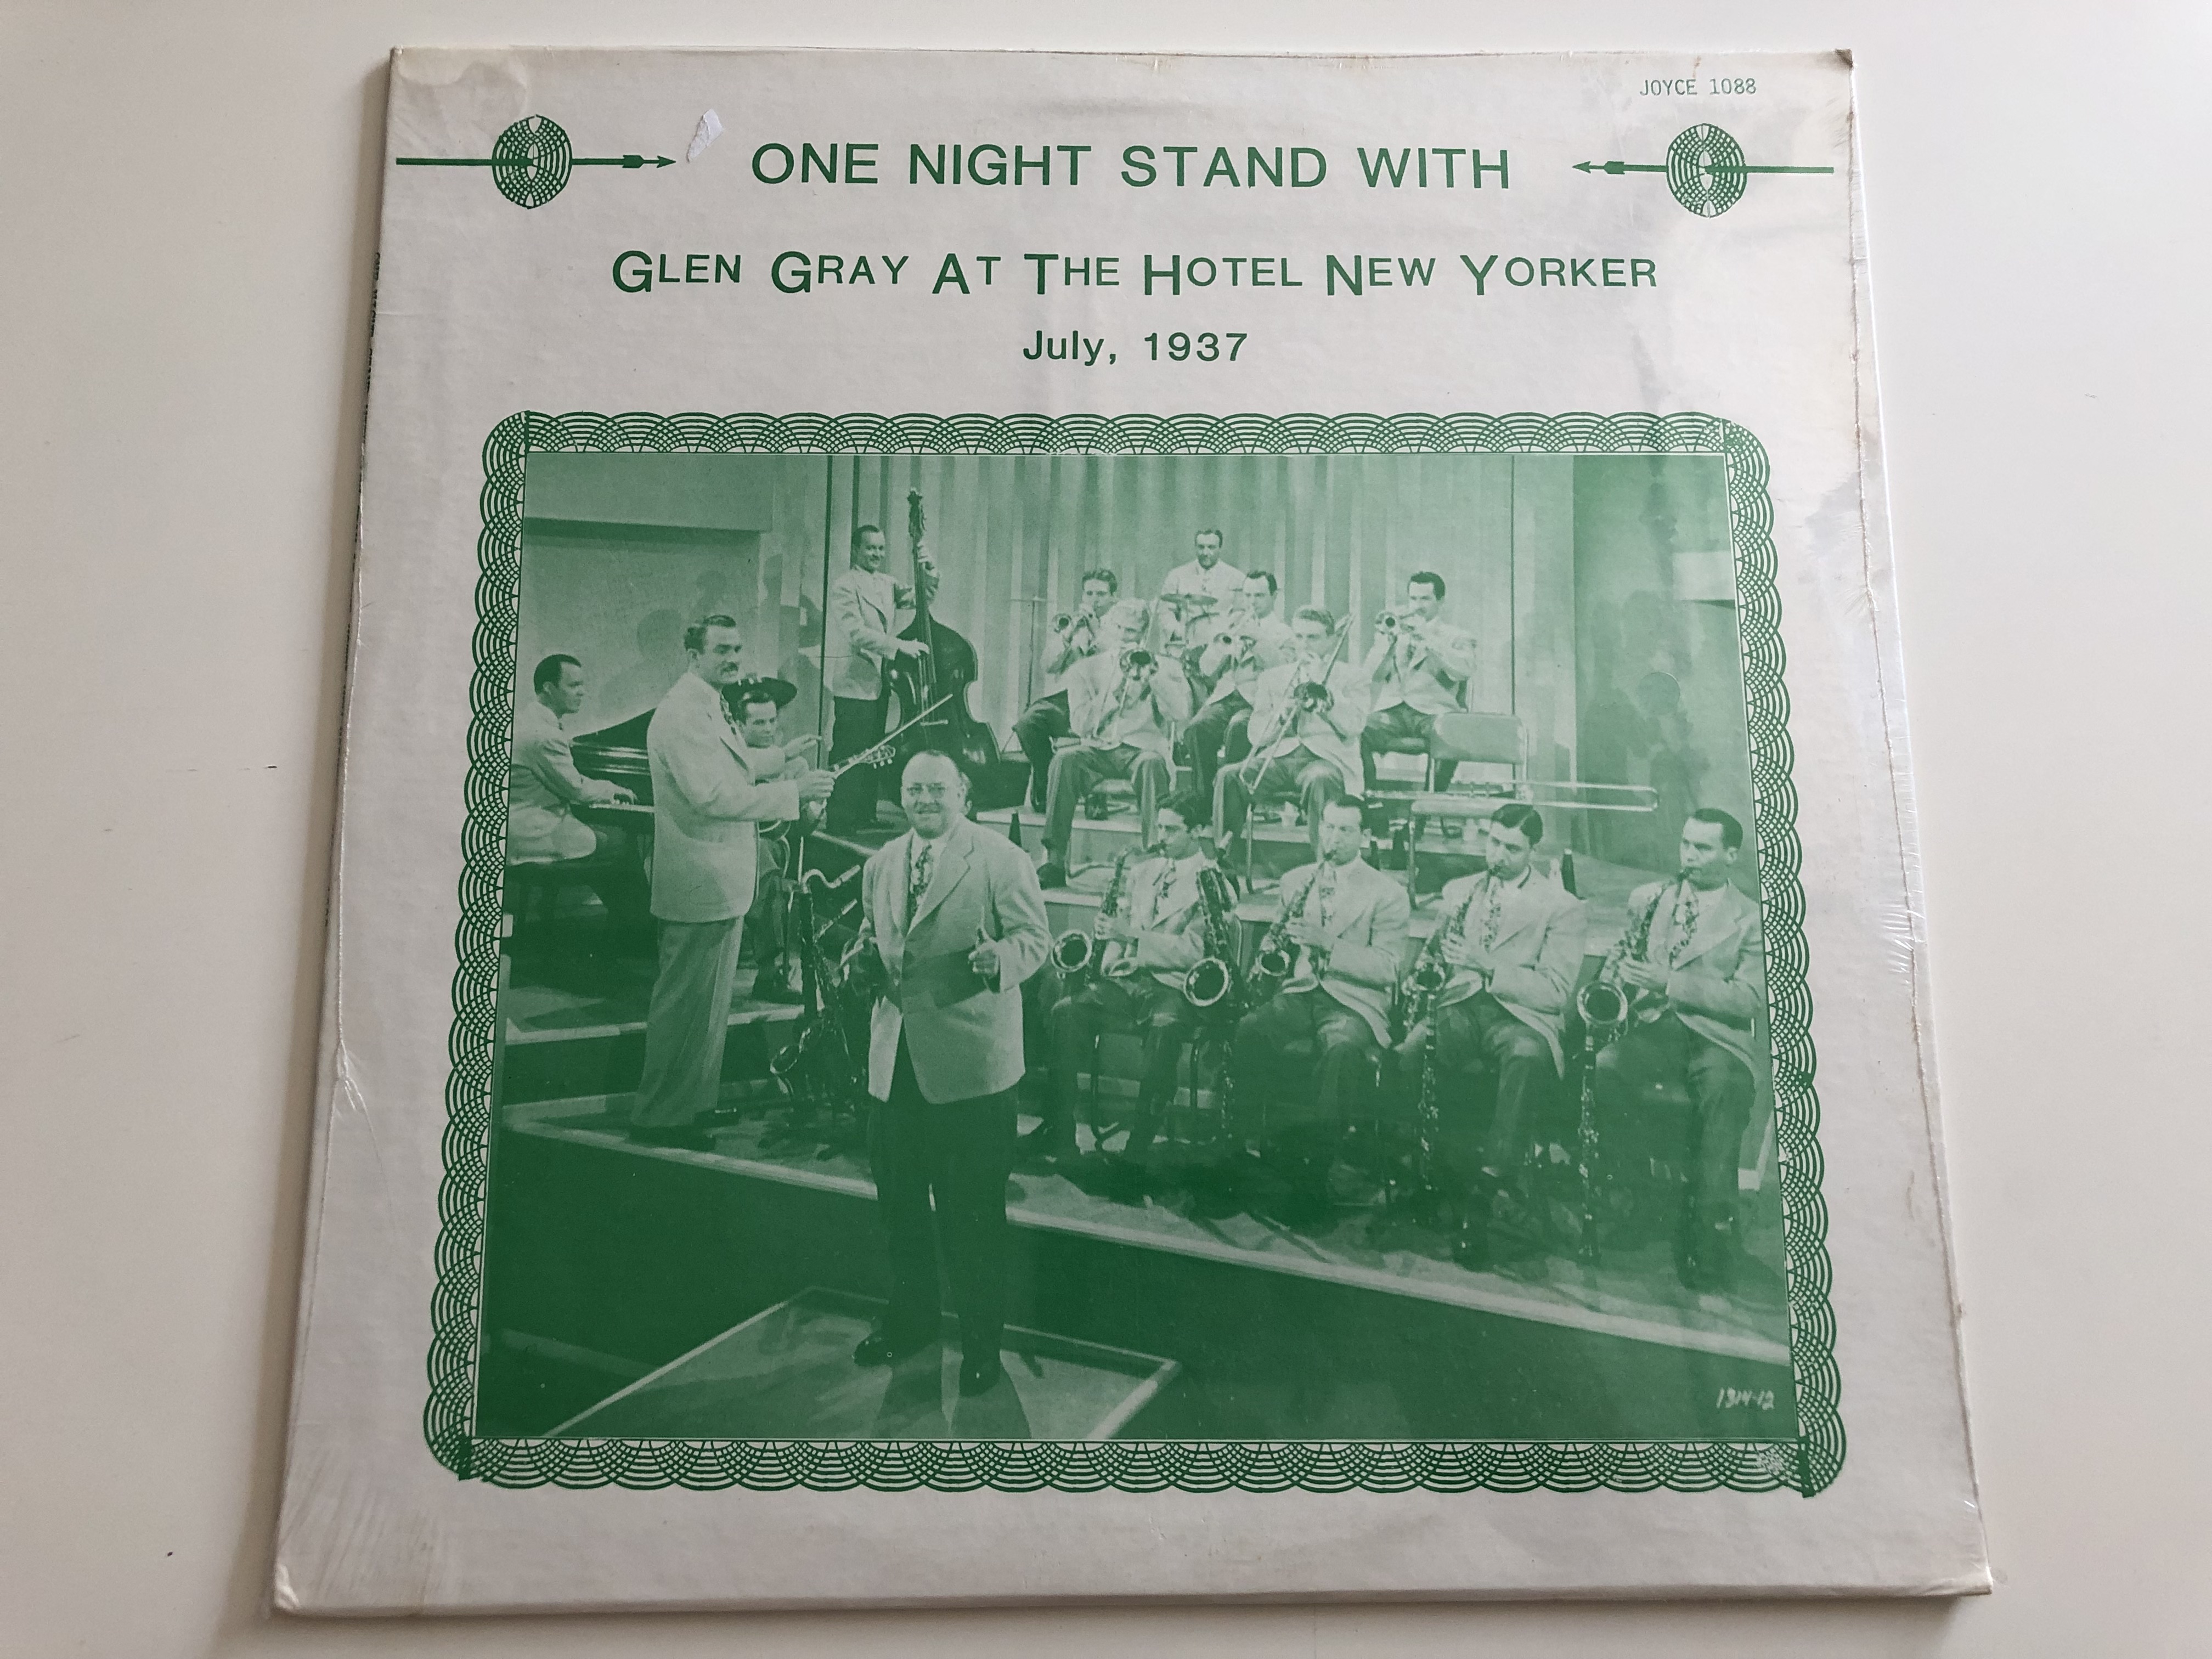 one-night-stand-with-glen-gray-at-the-hotel-new-yorker-july-1937-joyce-lp-1088-1-.jpg